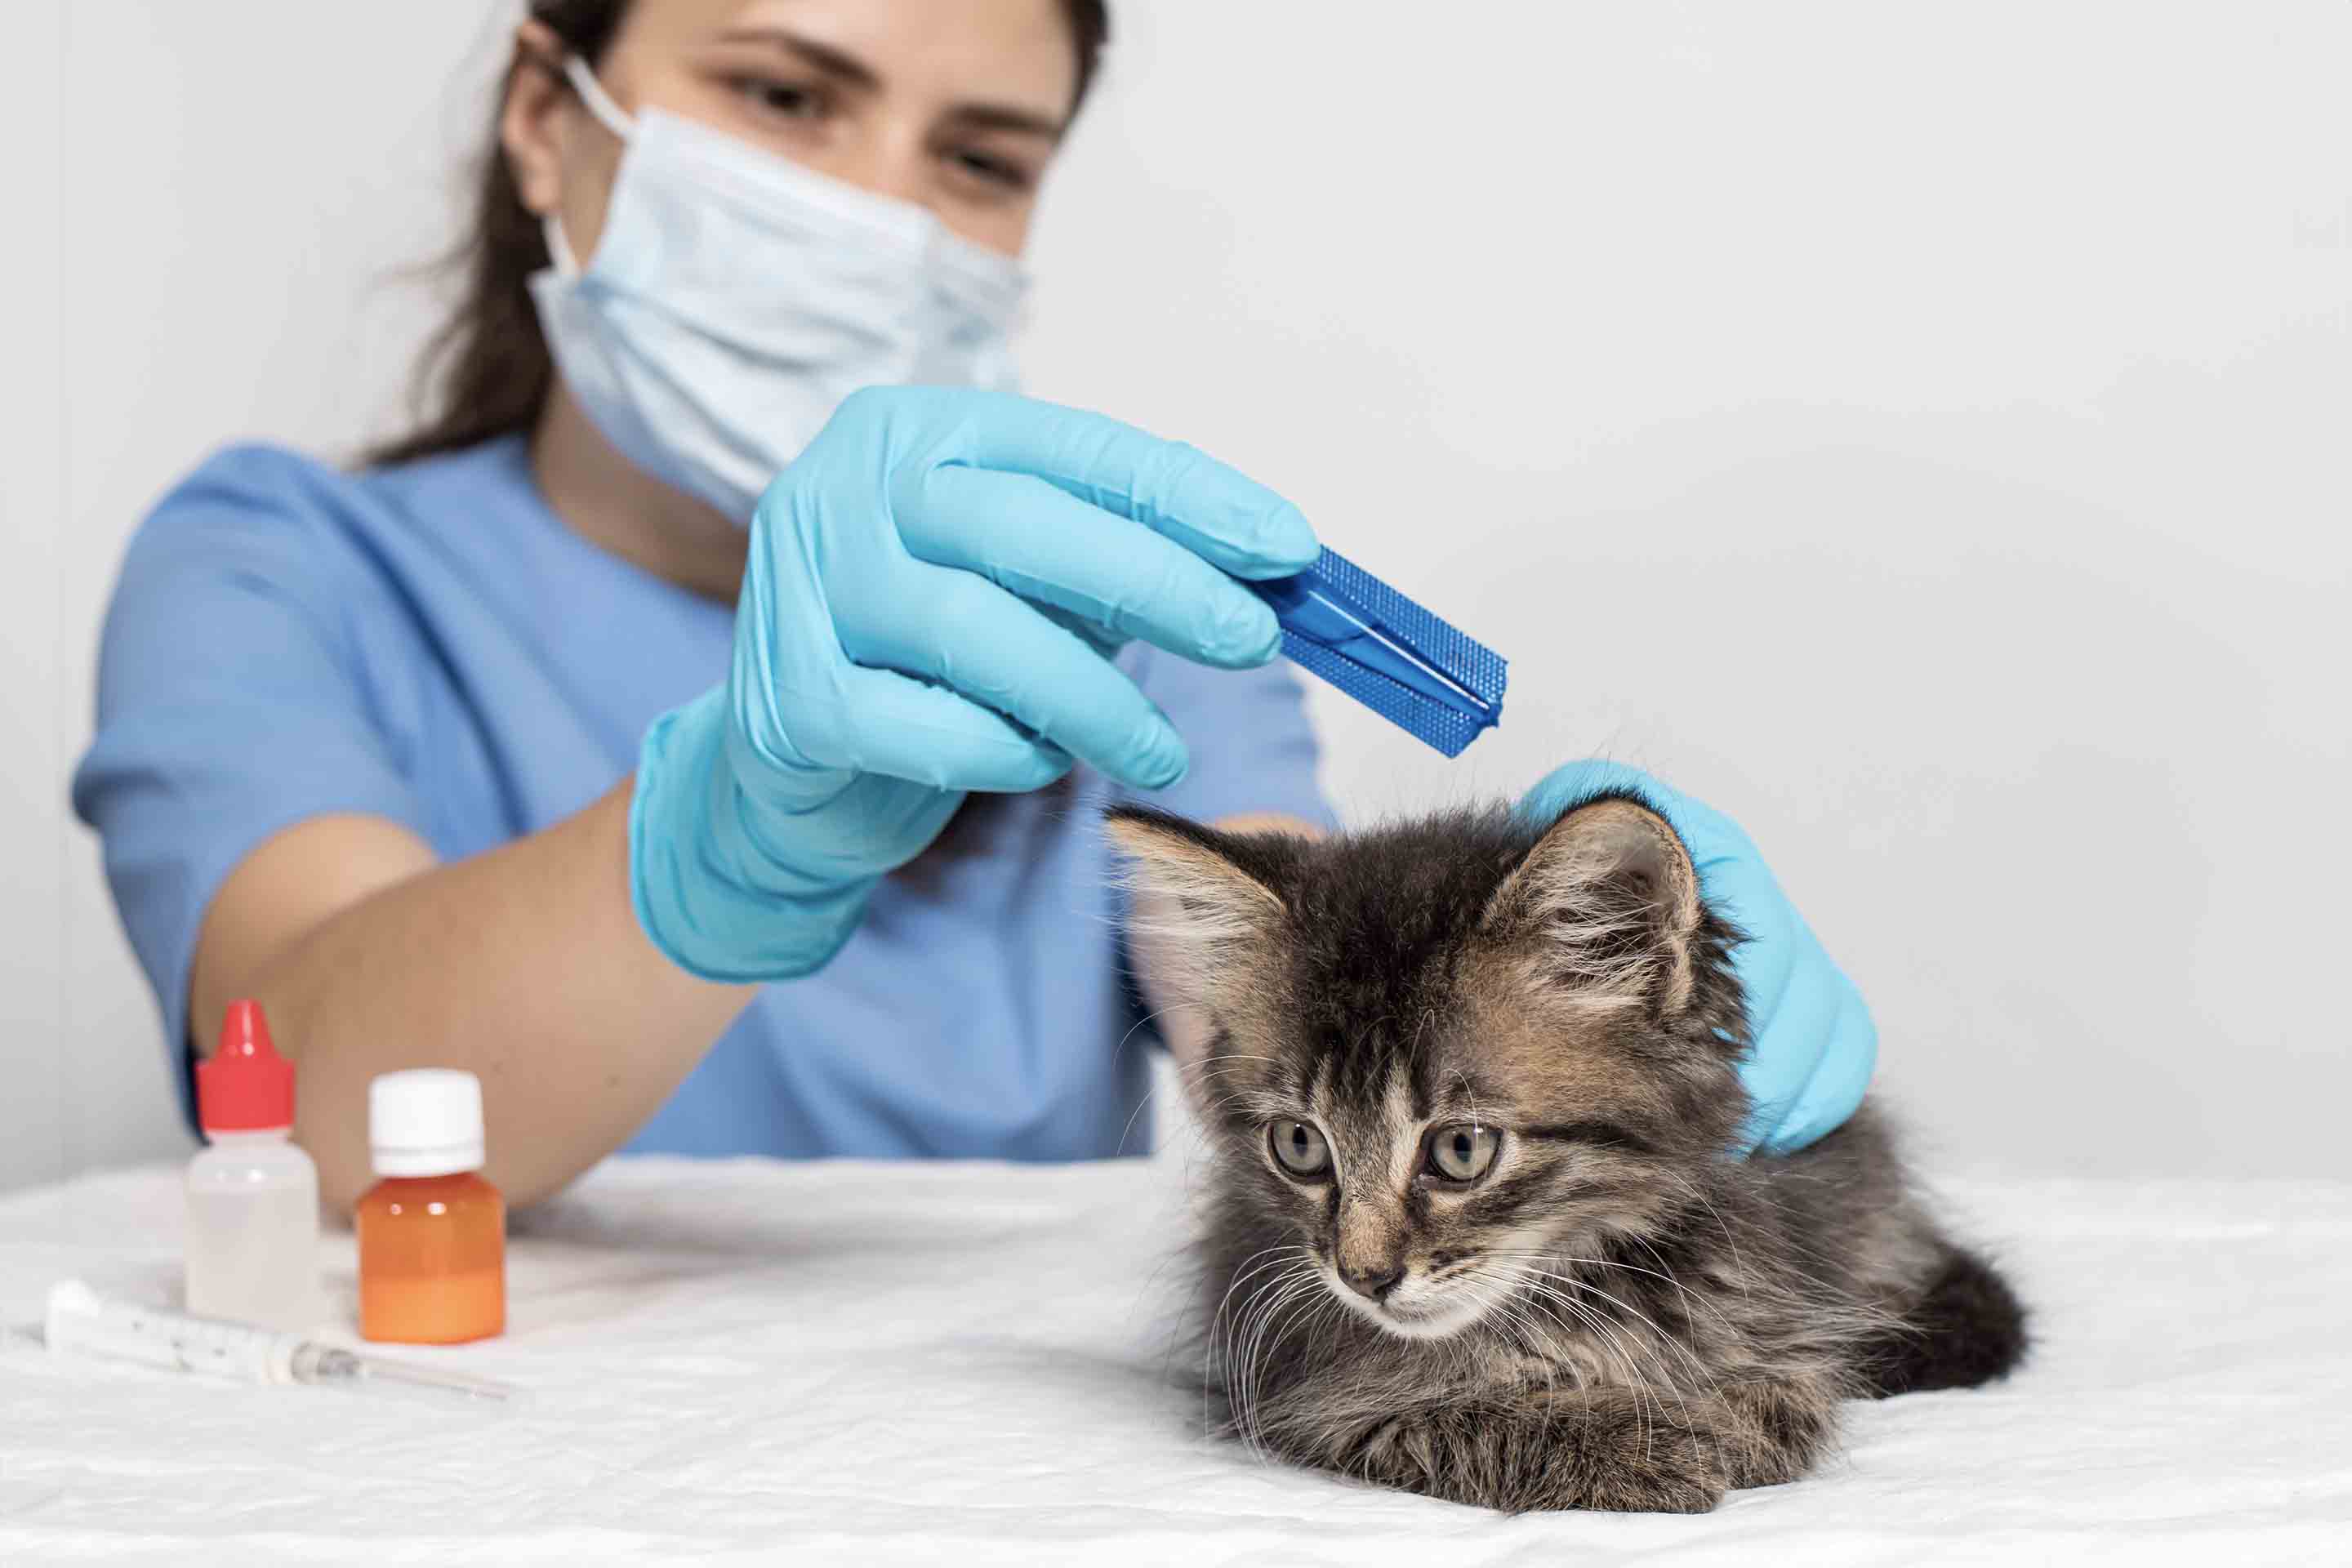 How to Get Rid of Fleas On Kittens